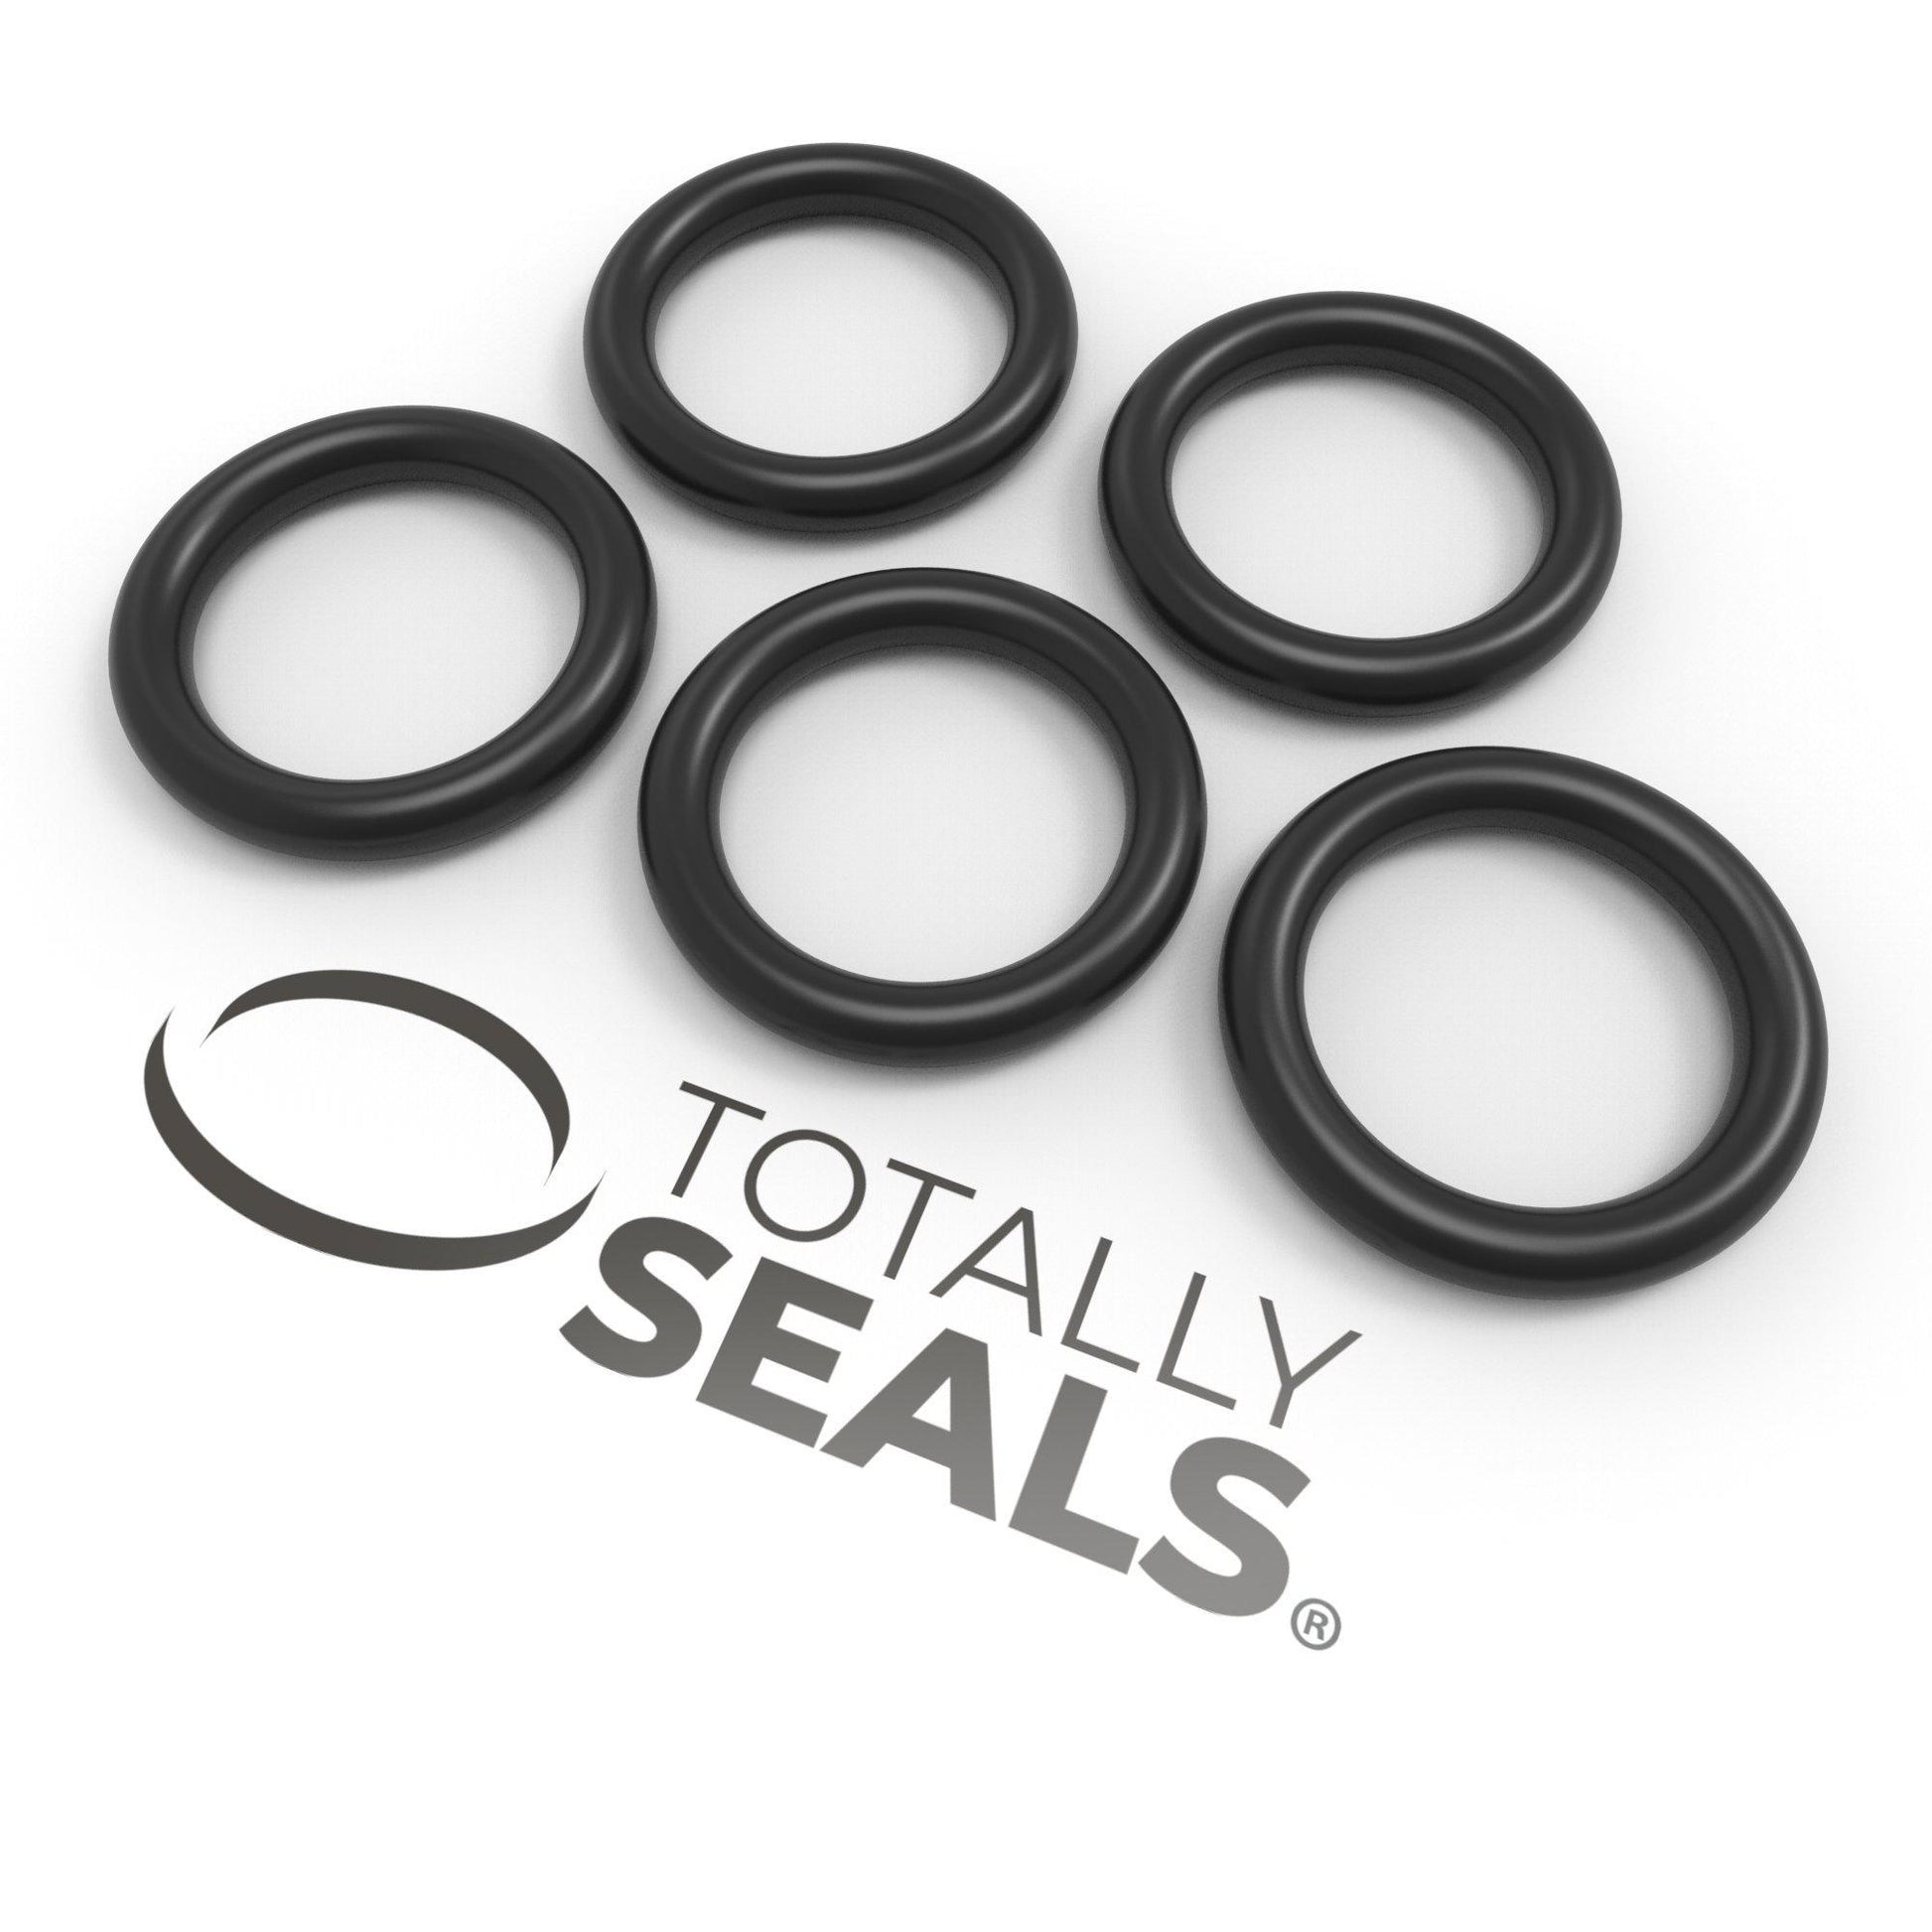 16mm x 1.5mm (19mm OD) Nitrile O-Rings - Totally Seals®